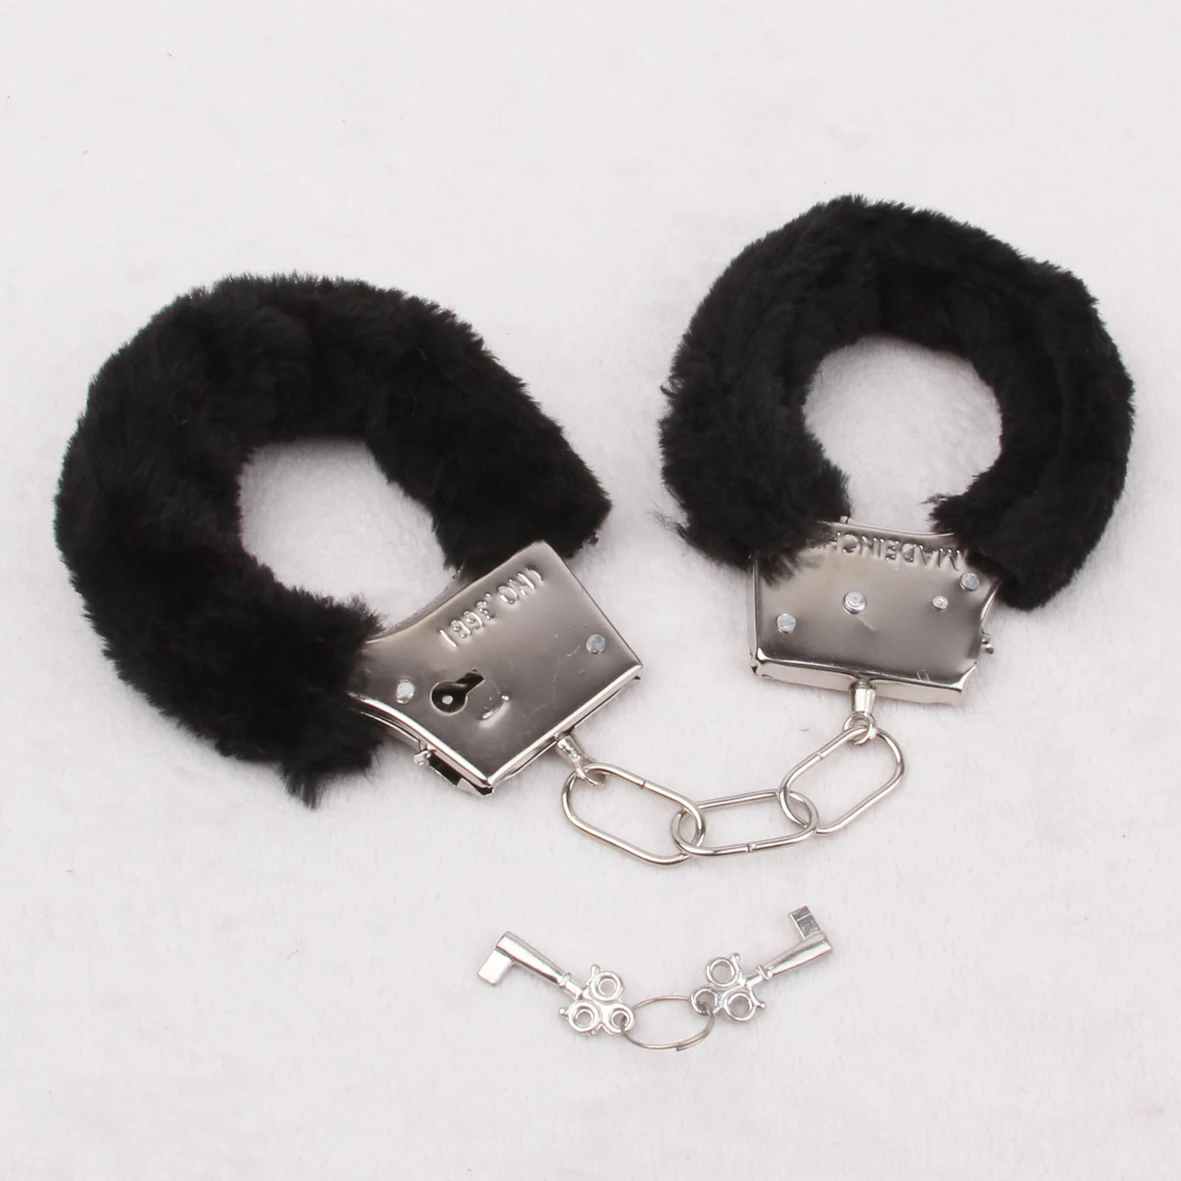 Role Play Adult Game Sexy Toys Fur Bondage Handcuffs Buy S